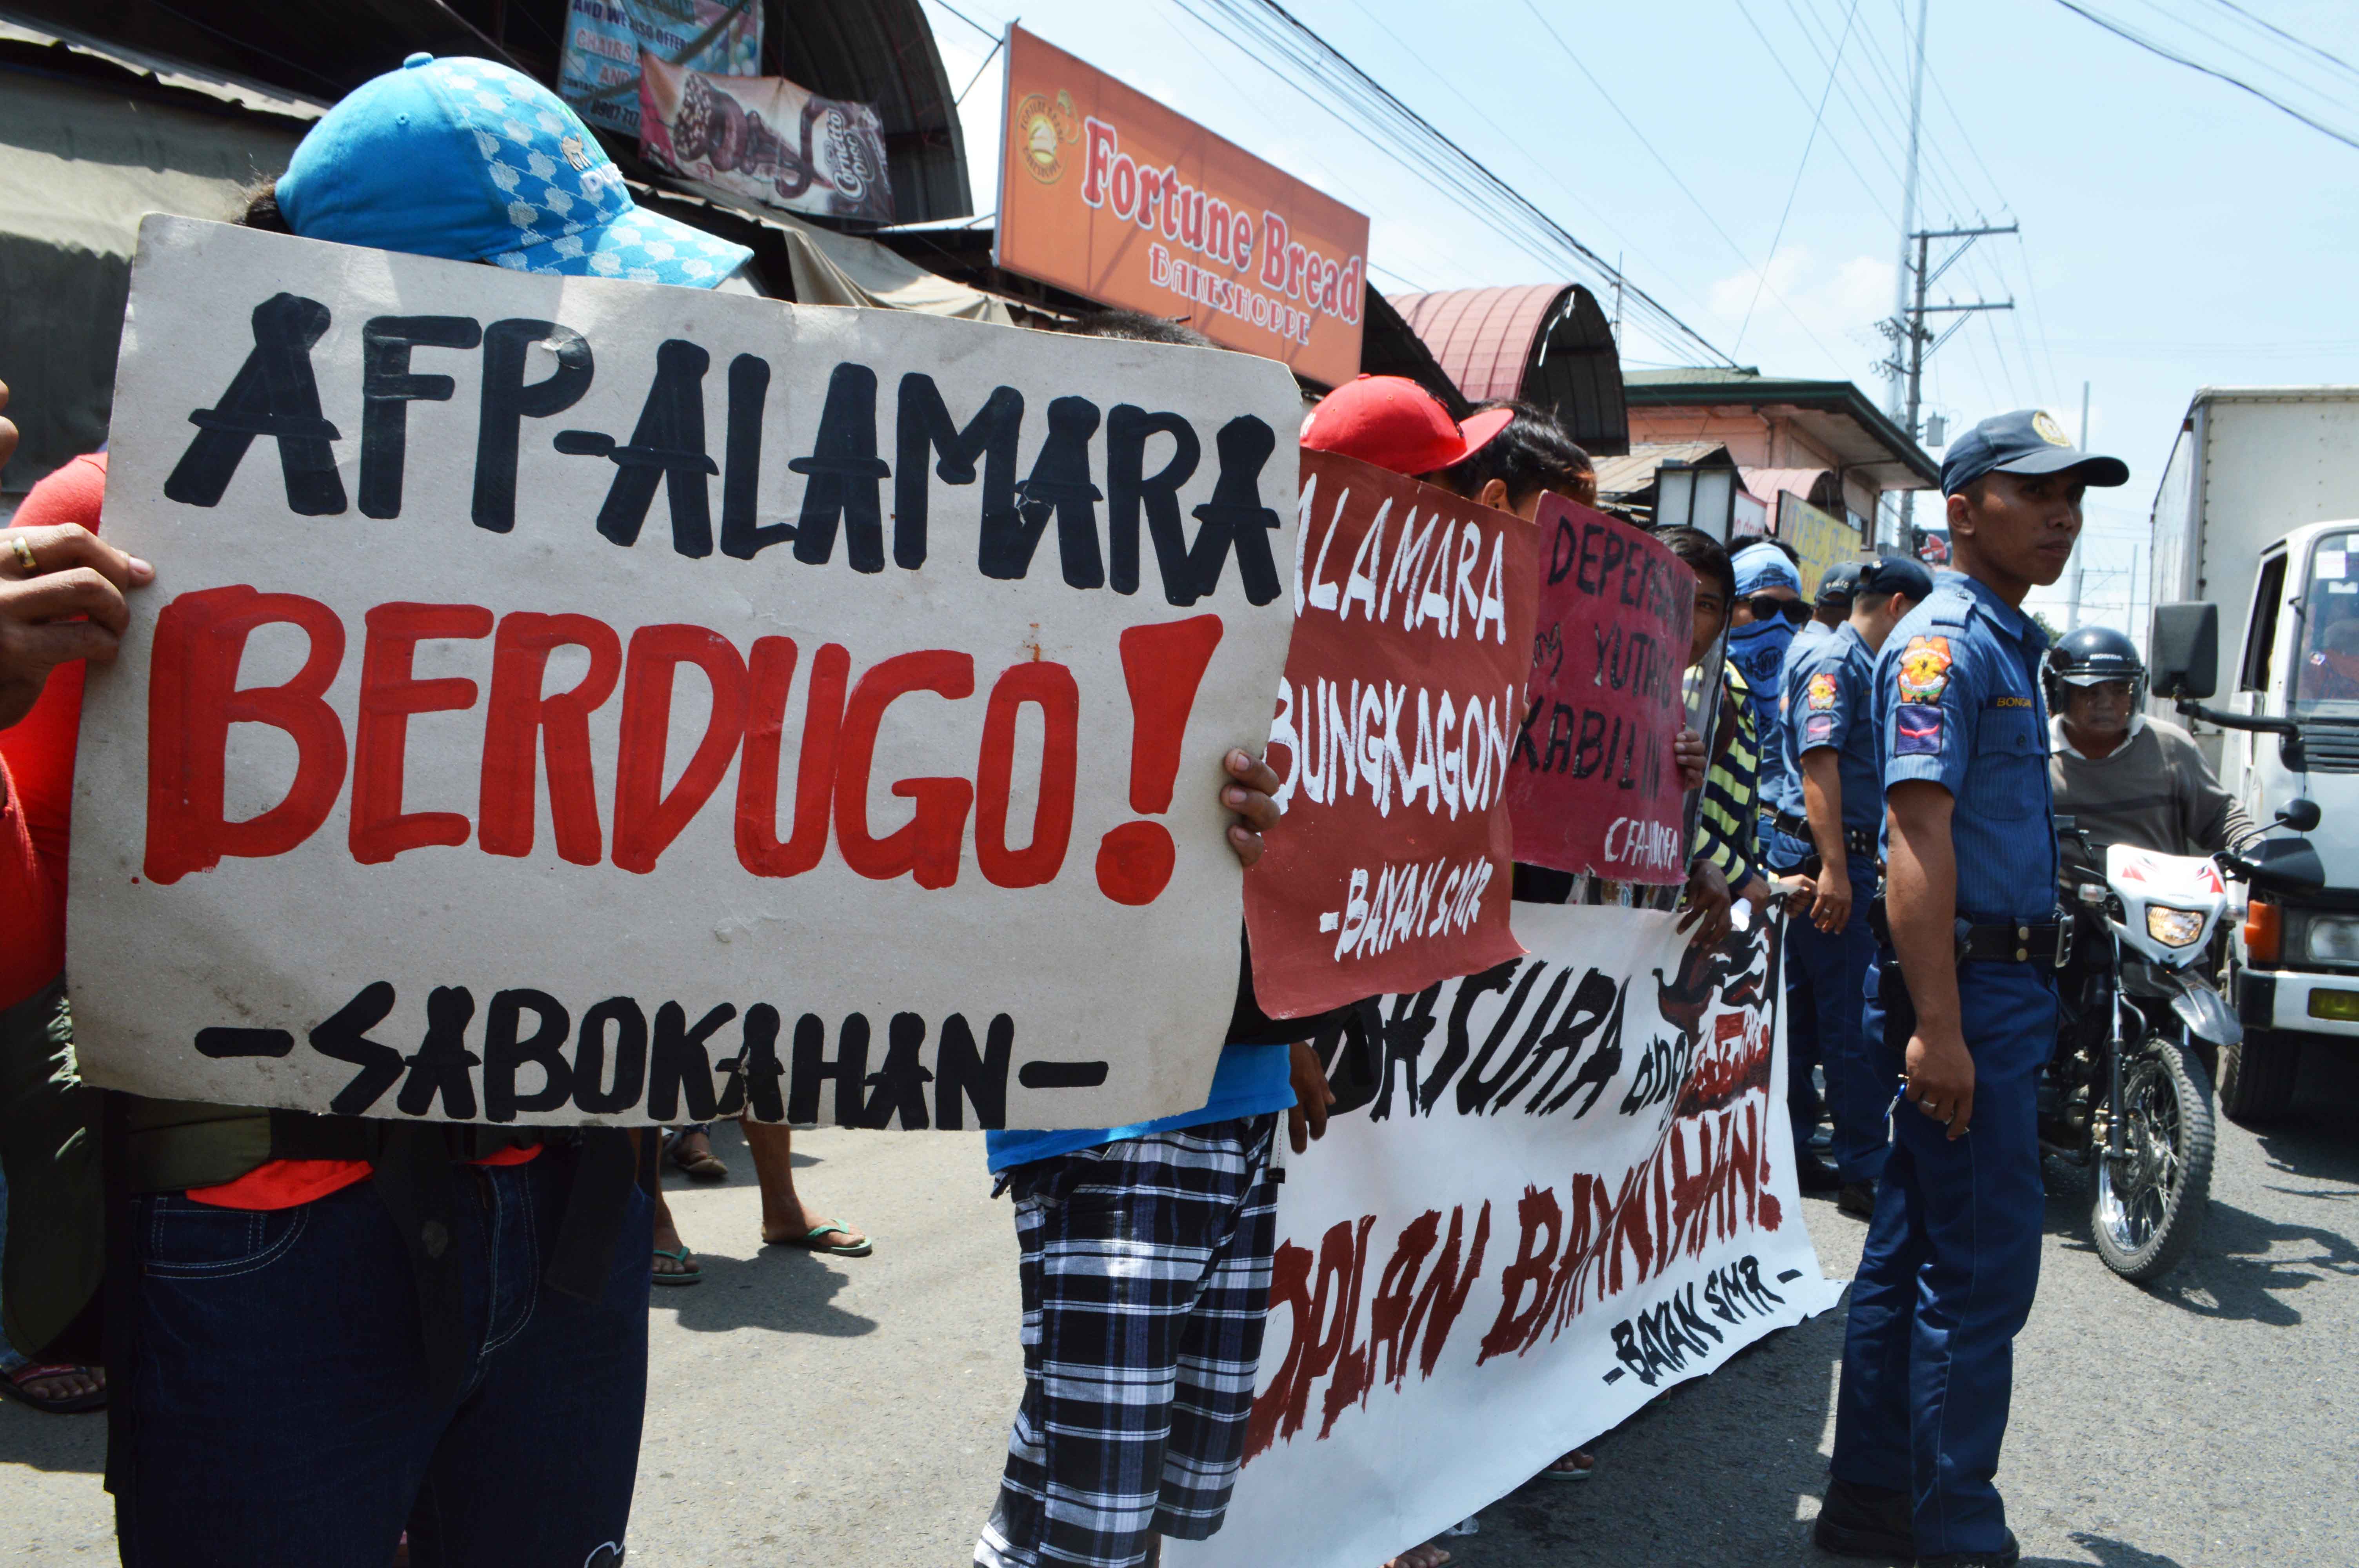 Protesters rally at the Eastern Mindanao Command Headquarters.